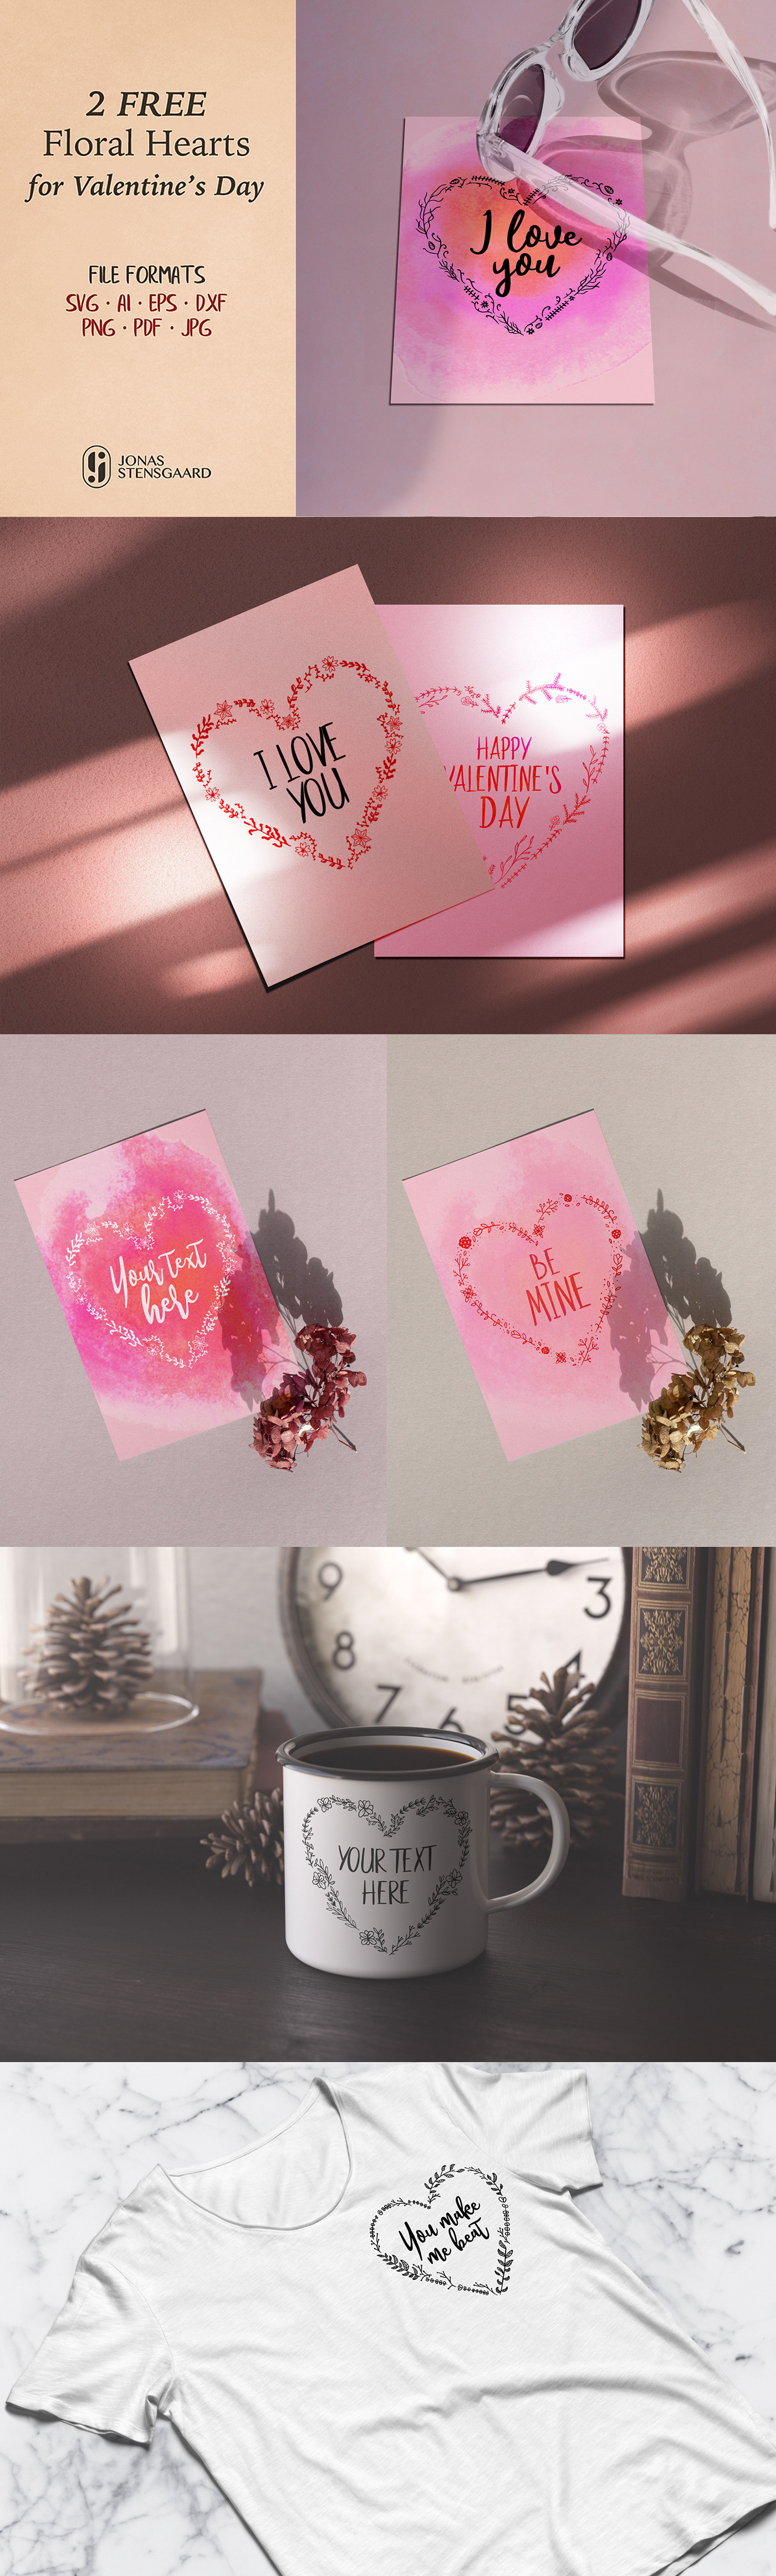 Free Floral Valentine's Day Hearts is a lovely hand drawn floral hearts comes in 300+ DPI.